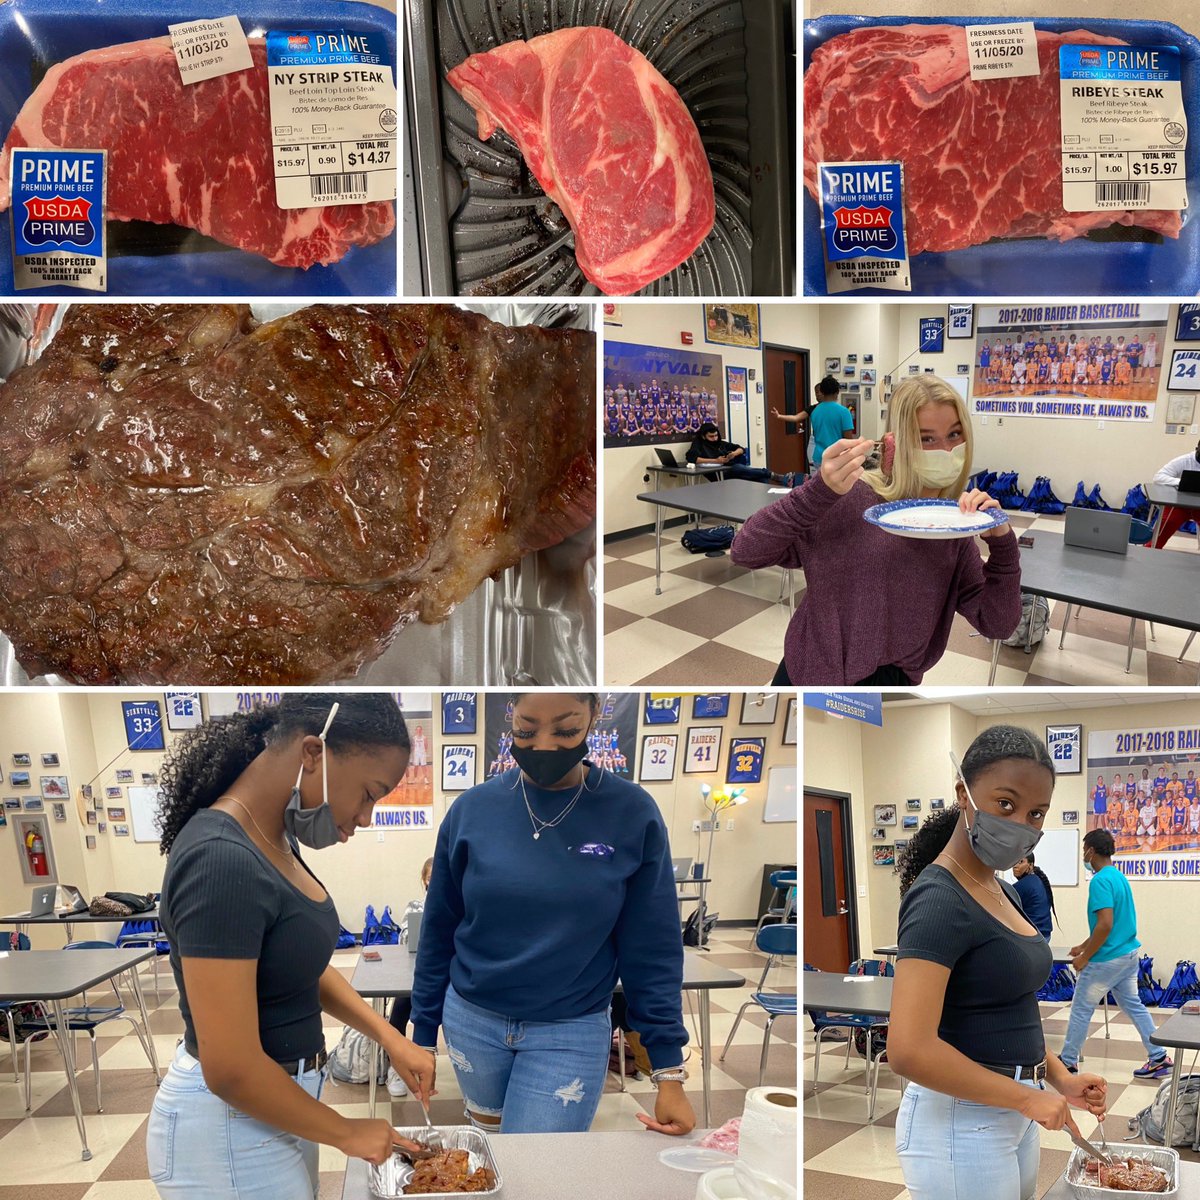 Advanced Animal Science: beef quality grade and cuts; I don’t always remember what I see or hear, but I rarely forget what I taste! #steak #prime #select #ribeye #nystripsteak #filetmignon #mediumwell #mediumrare #ninjafoodigrill #iloveteaching